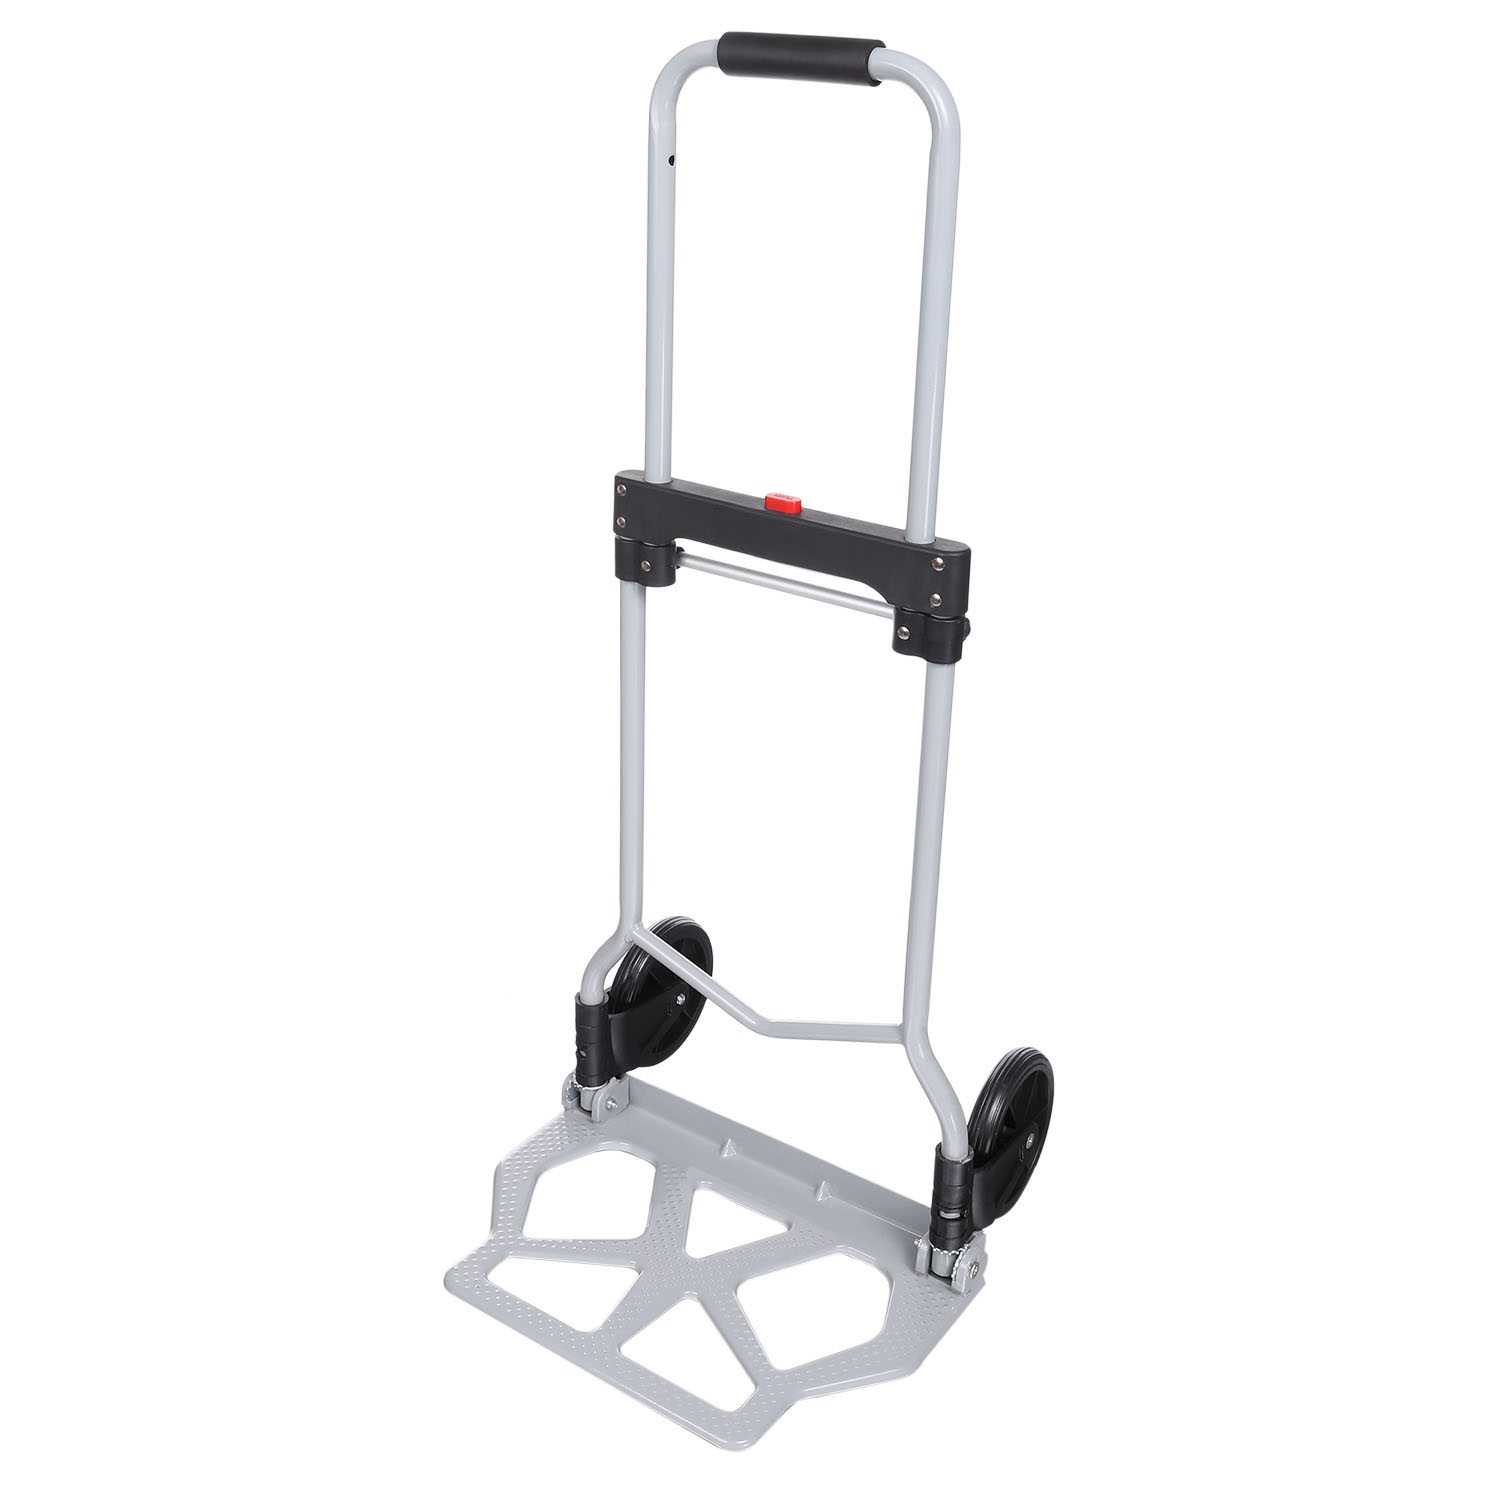 Portable Folding Hand Truck Dolly Luggage Carts, Silver, 220 lbs Capacity, Industrial/Travel/Shopping HDPML